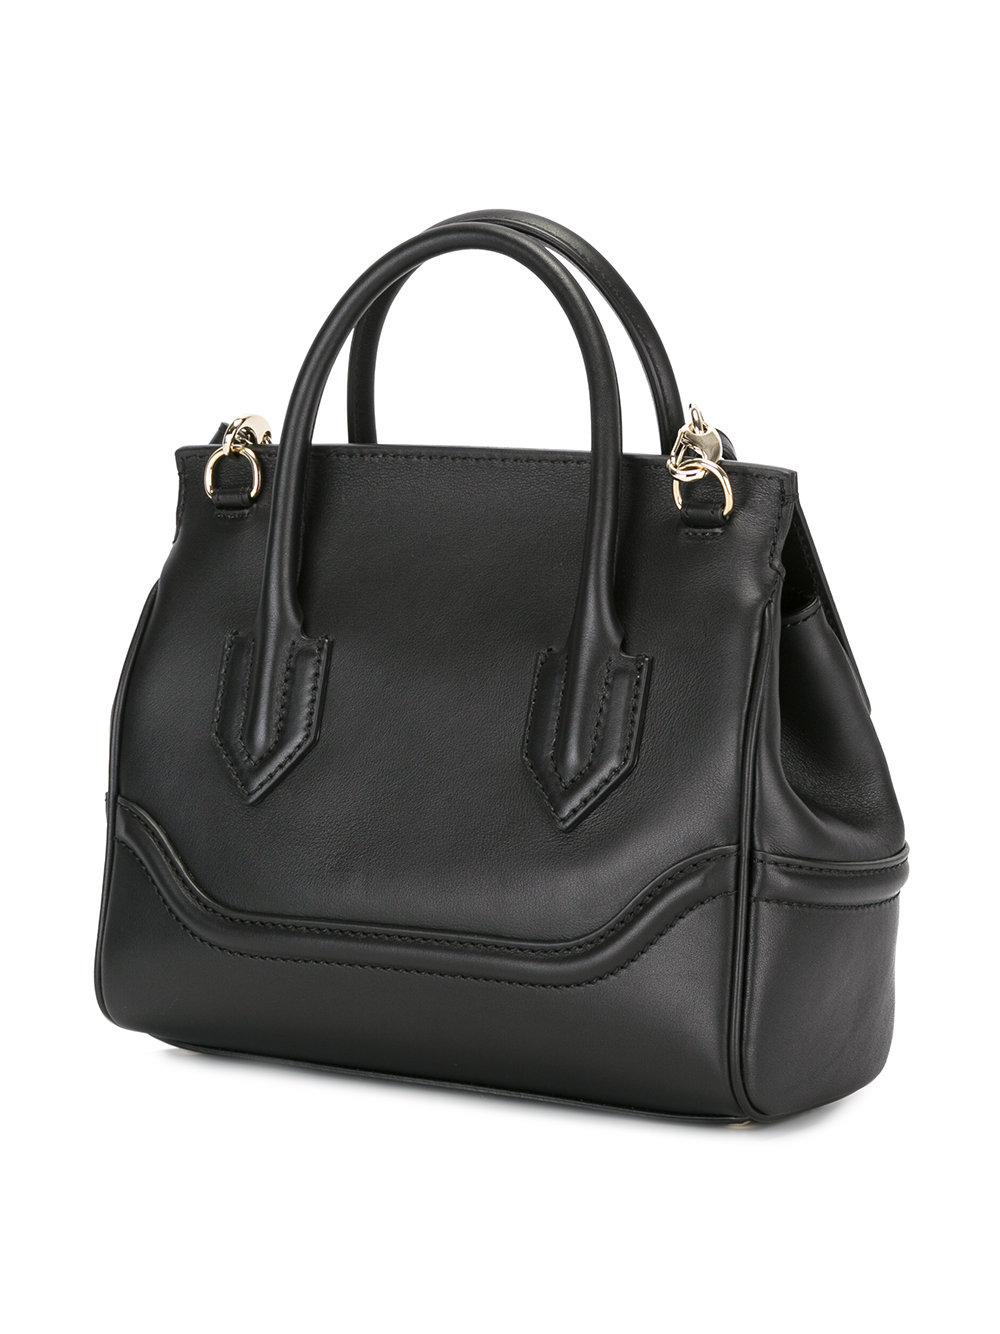 Versace Leather Palazzo Empire Shoulder Bag in Black - Lyst